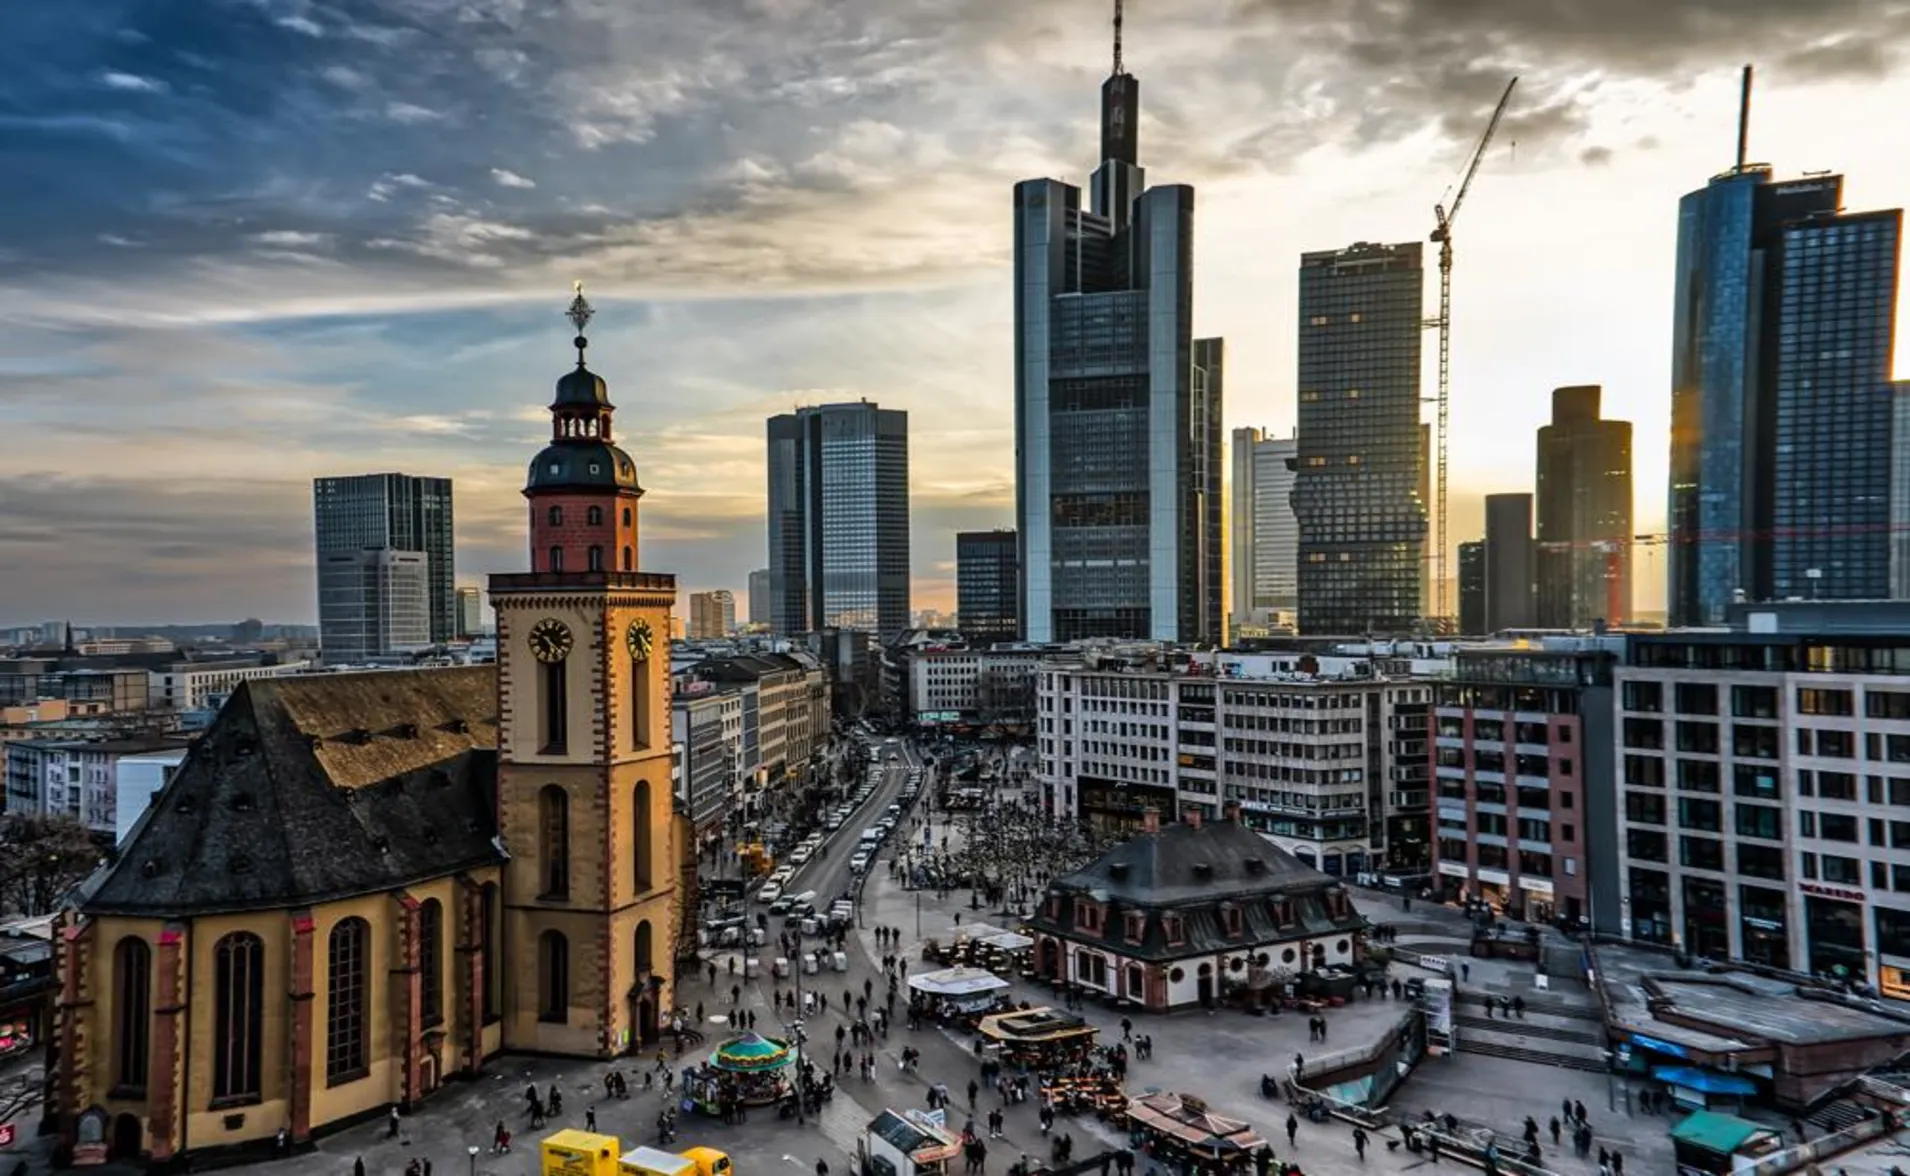 Skyscrapers and an old church at sunset in Frankfurt